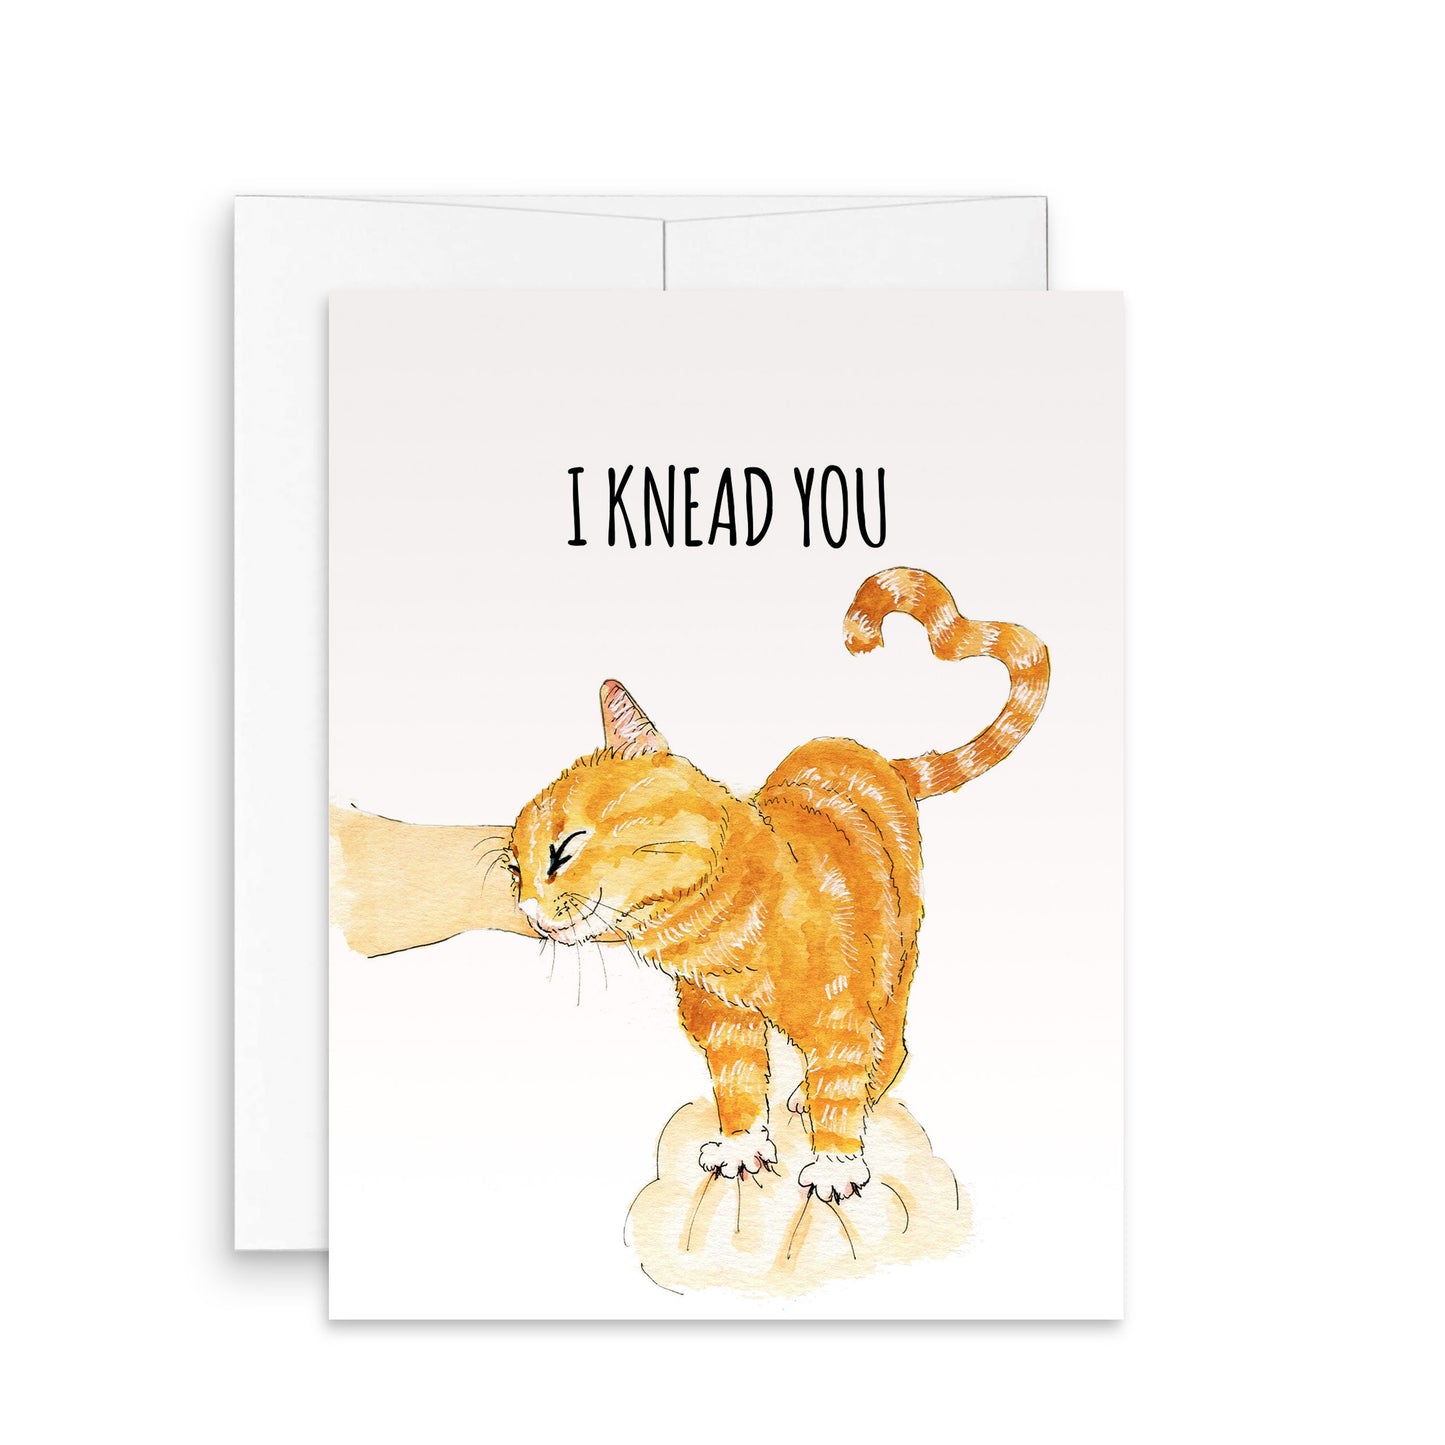 Funny Cat Valentines Card For Husband - Orange Cat Knead Your Love